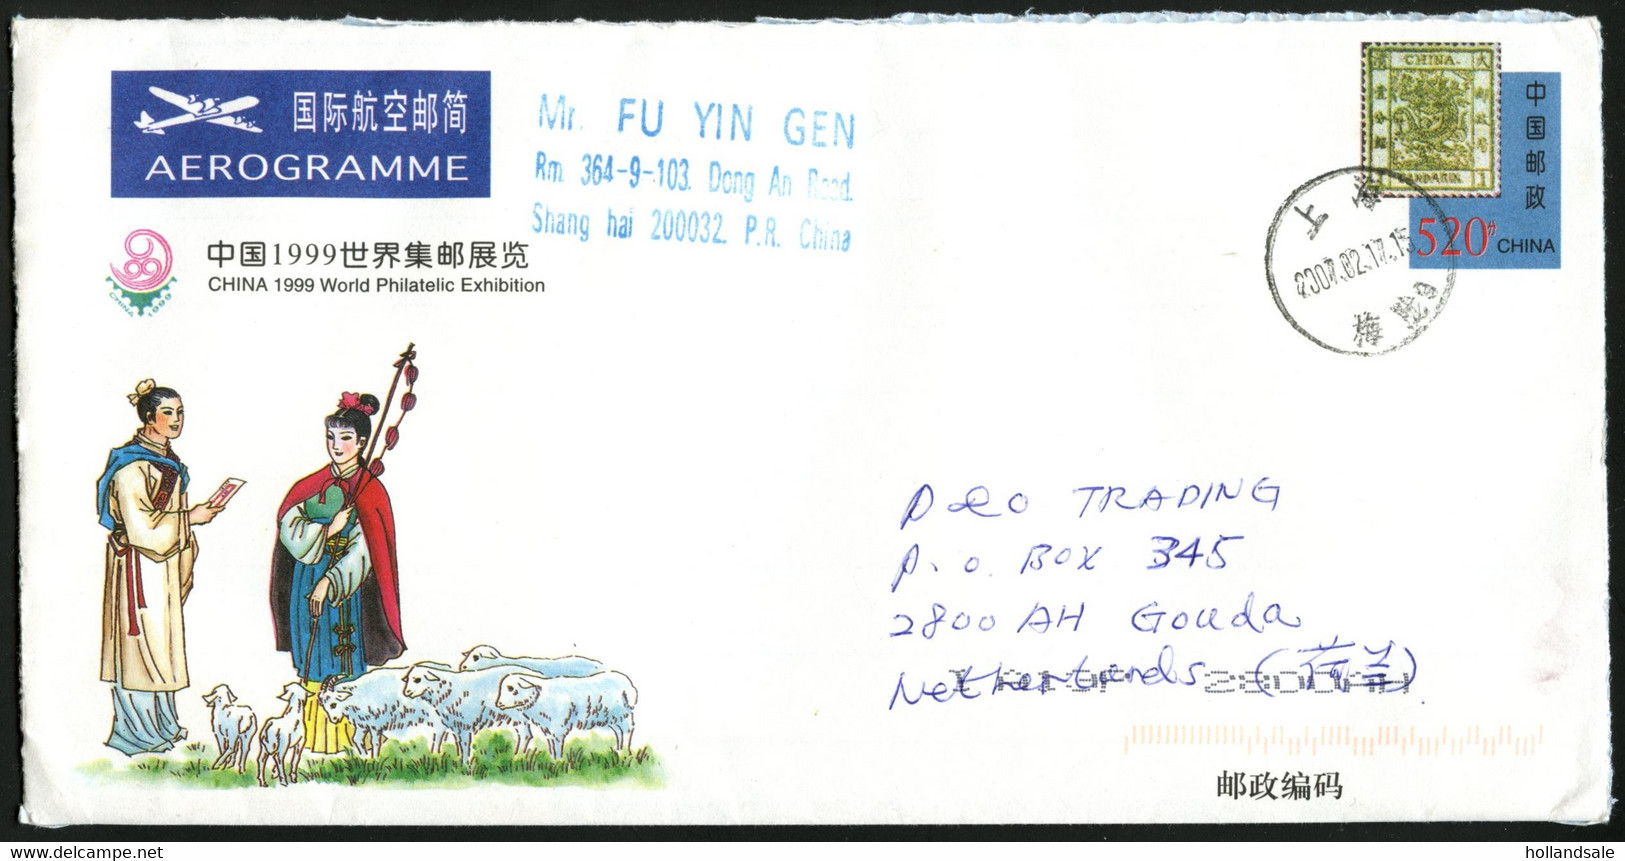 CHINA PRC - Special Aerogrammae Issued For The China 1999 World Philatelic Exhibition. Sent To Netherlands. - Aerogramme